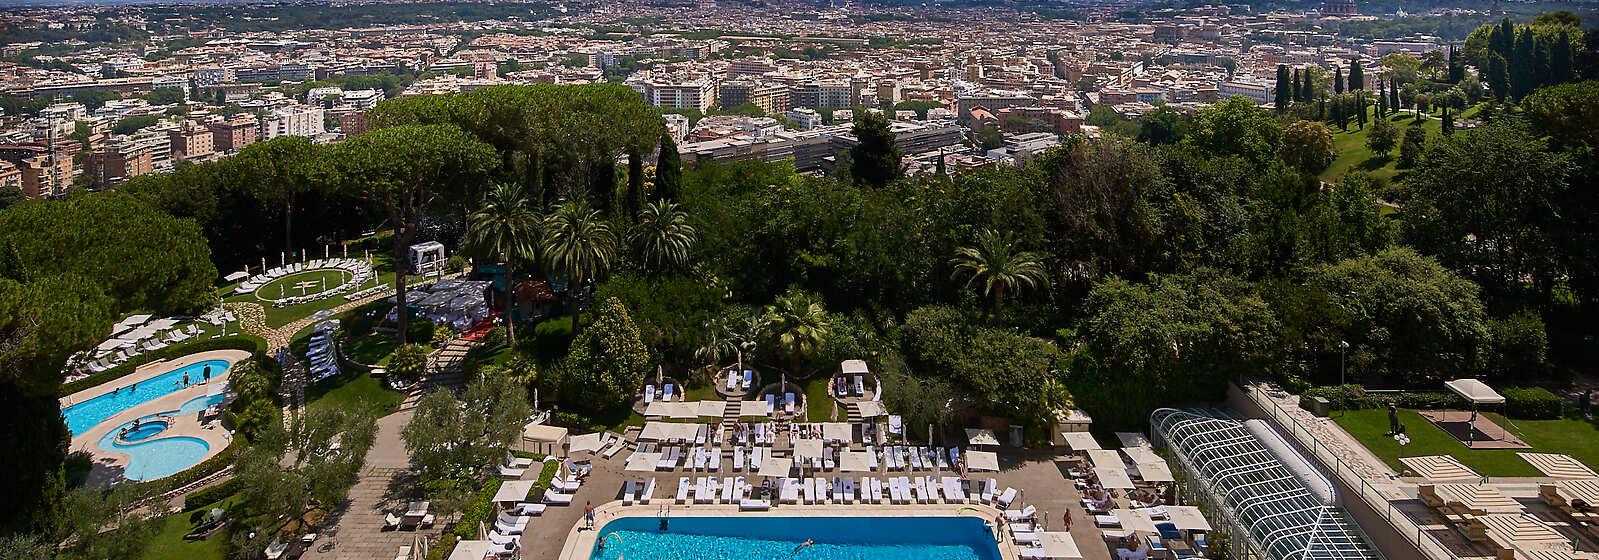 Daytime view over Rome from the terrace of Rome Cavalieri, A Waldorf Astoria